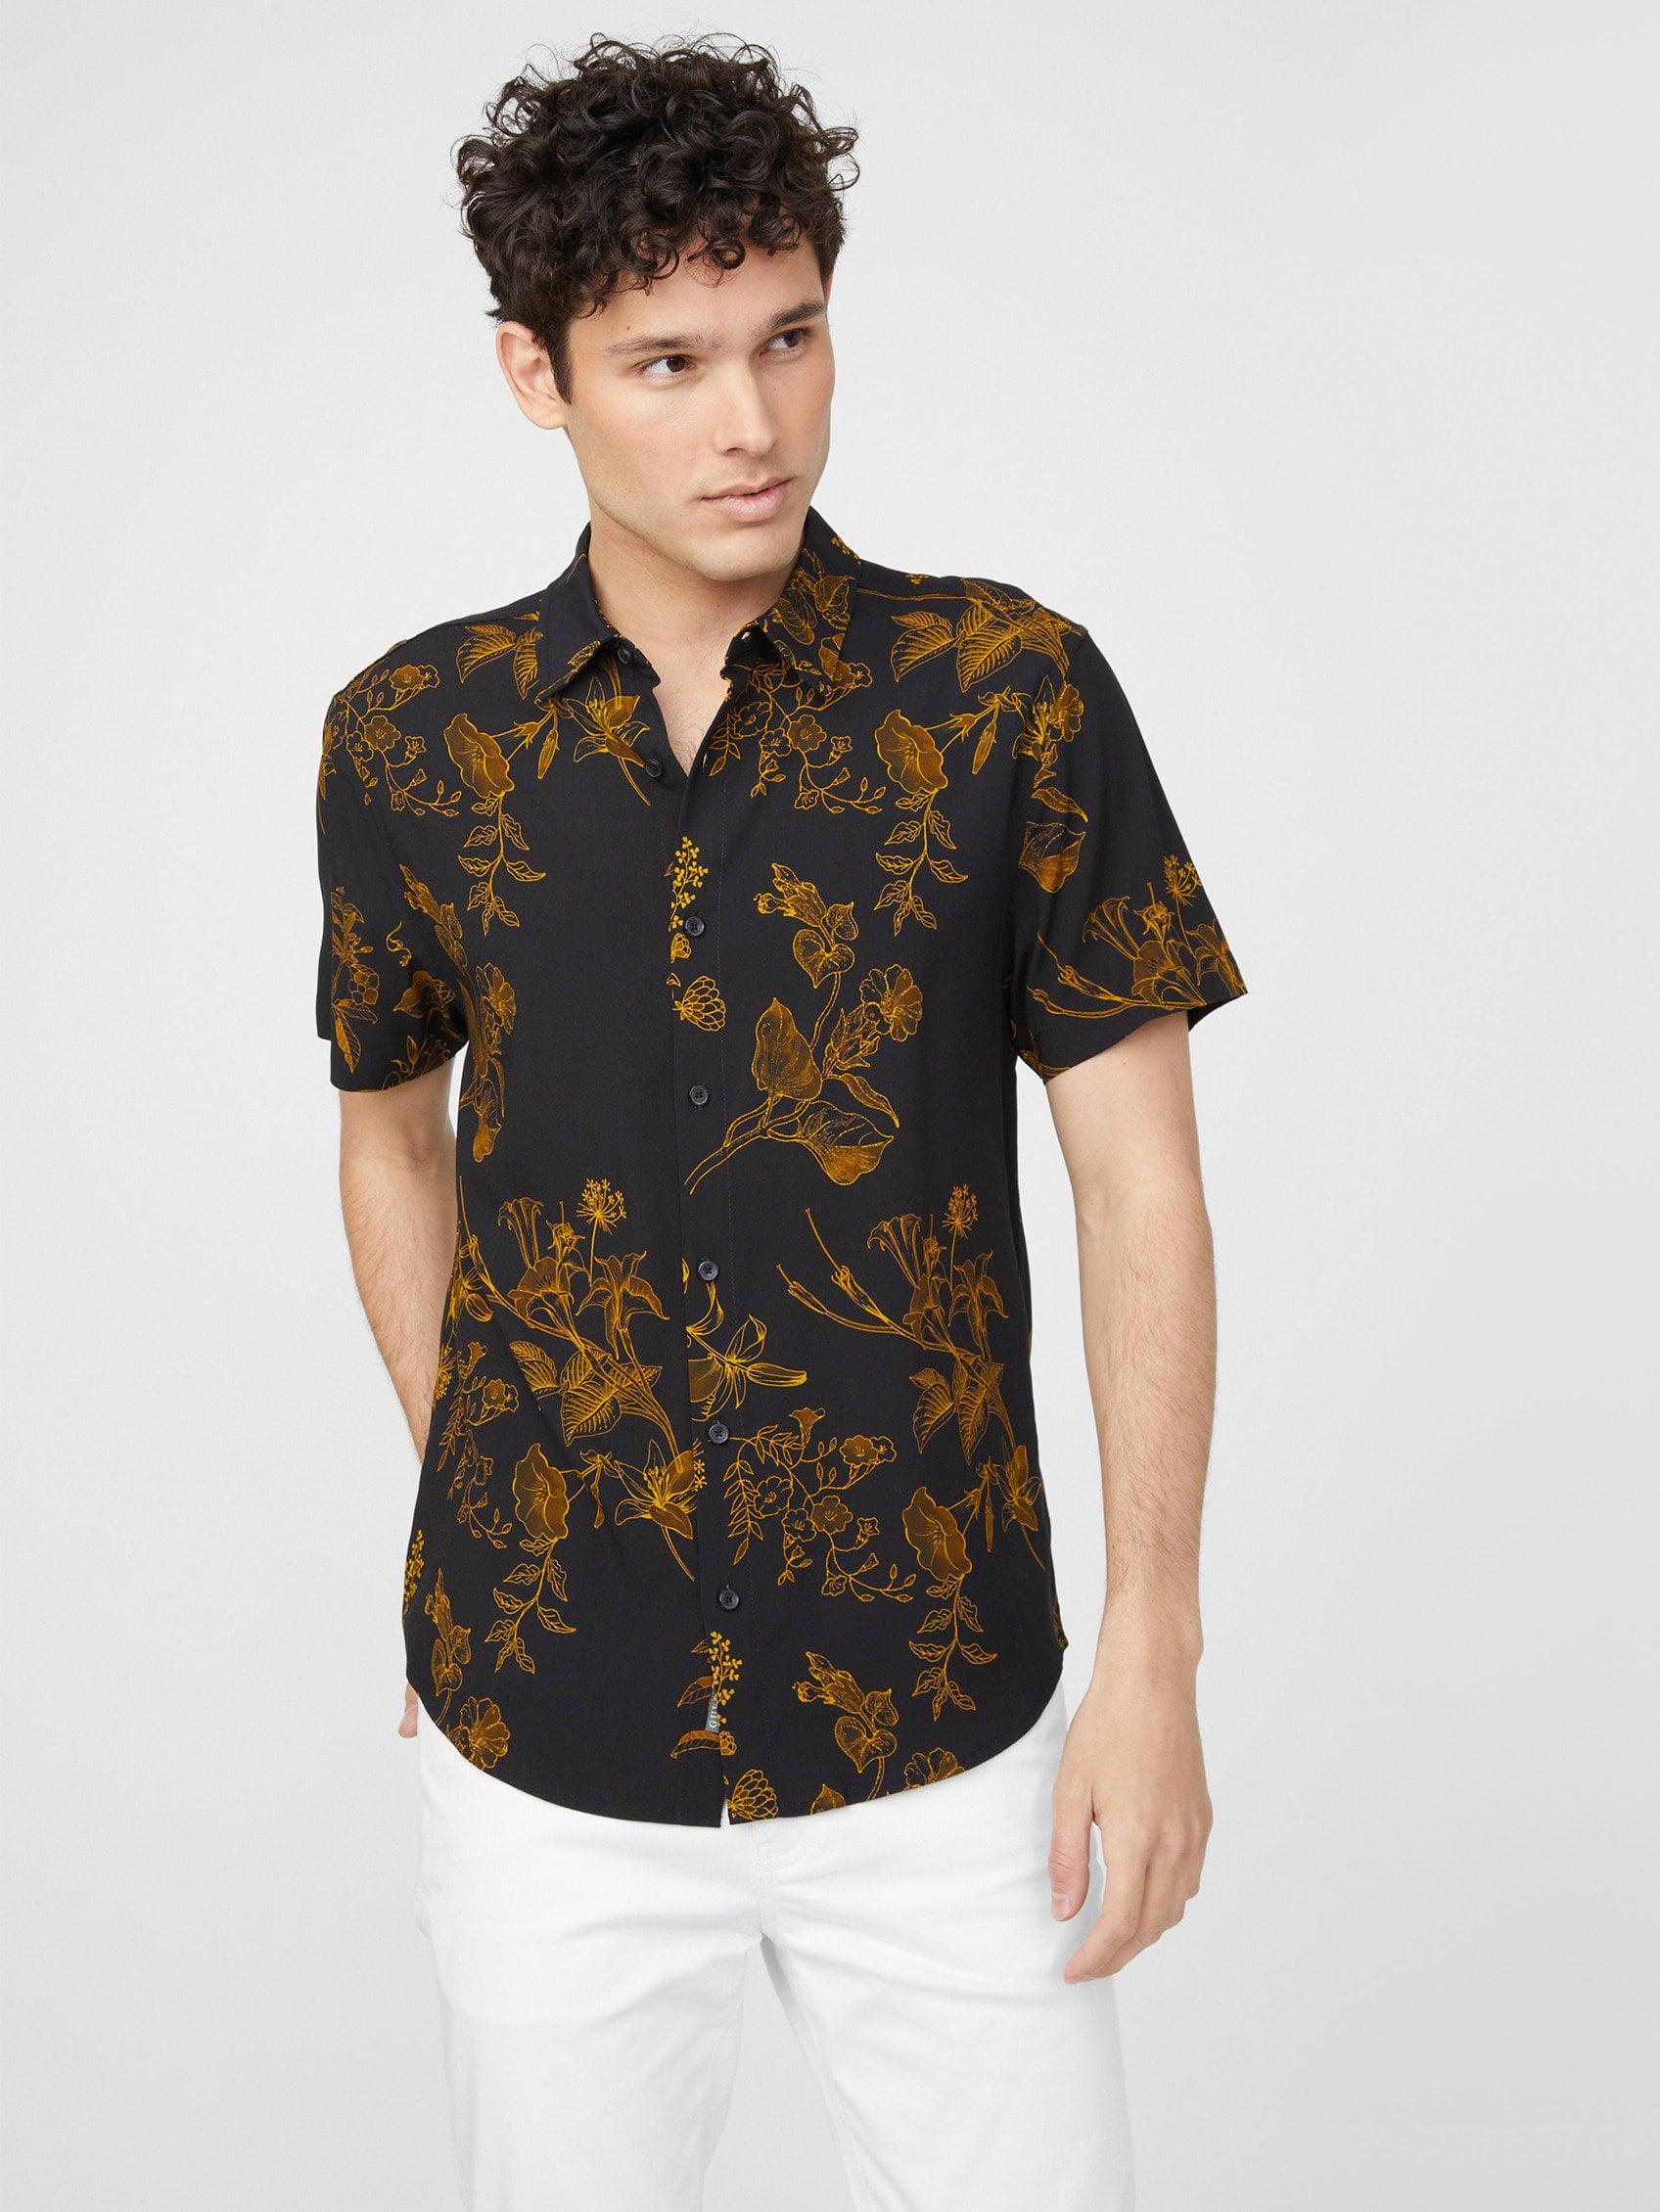 Guess Factory Rudd Floral Shirt in Black for Men | Lyst